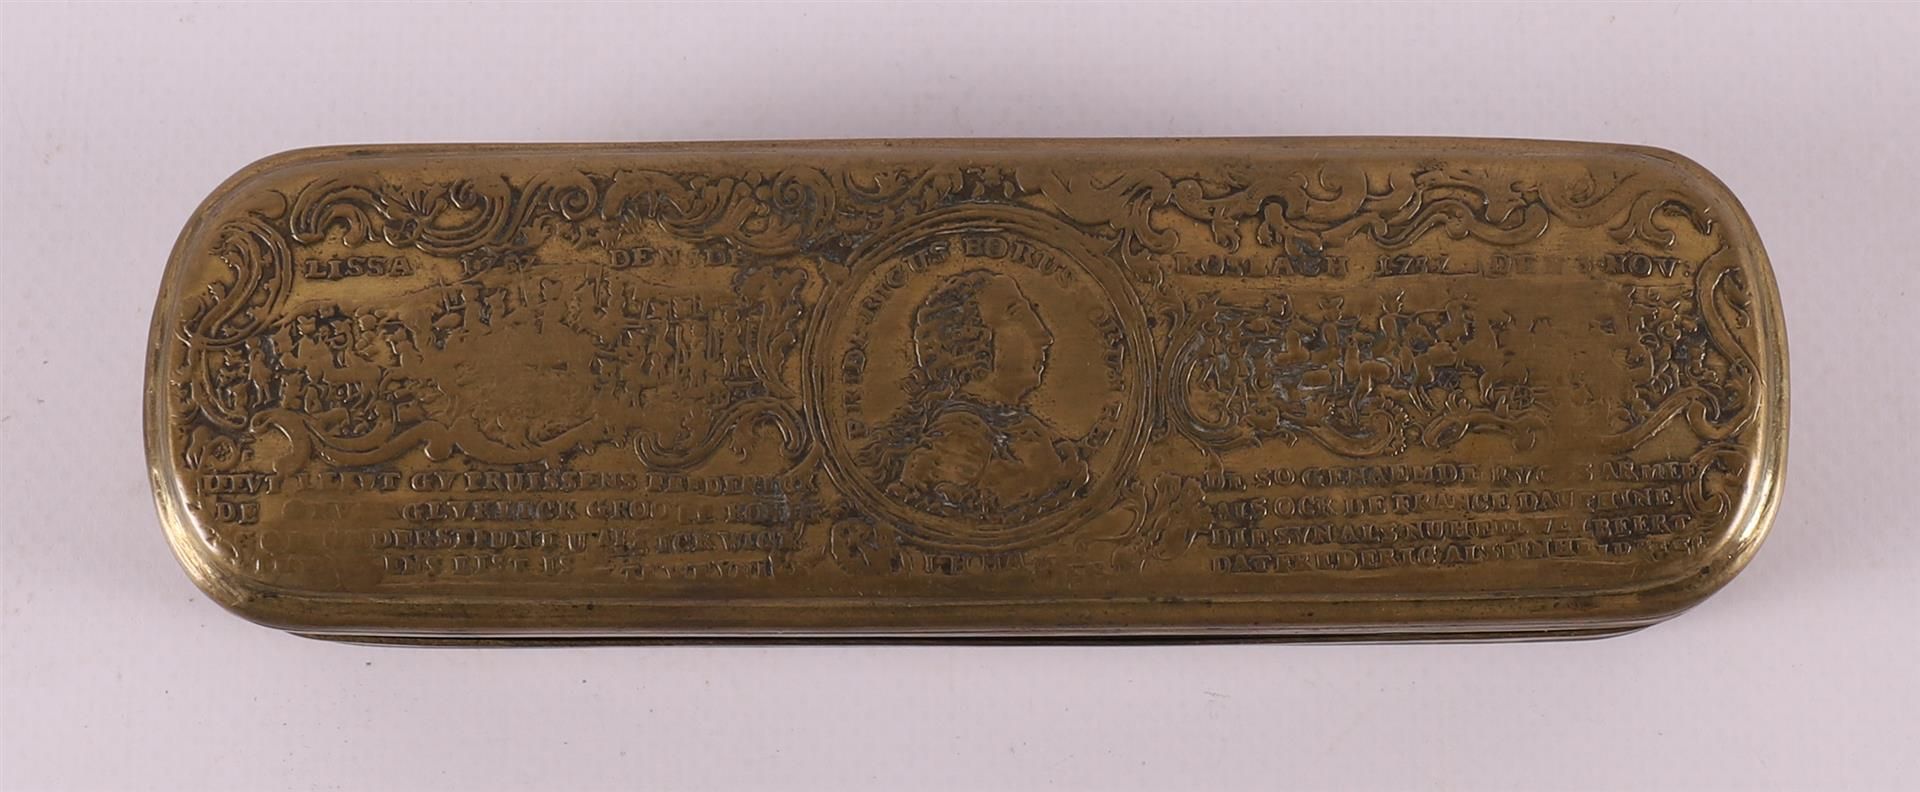 Two various brass tobacco boxes, 18th century. - Image 3 of 7